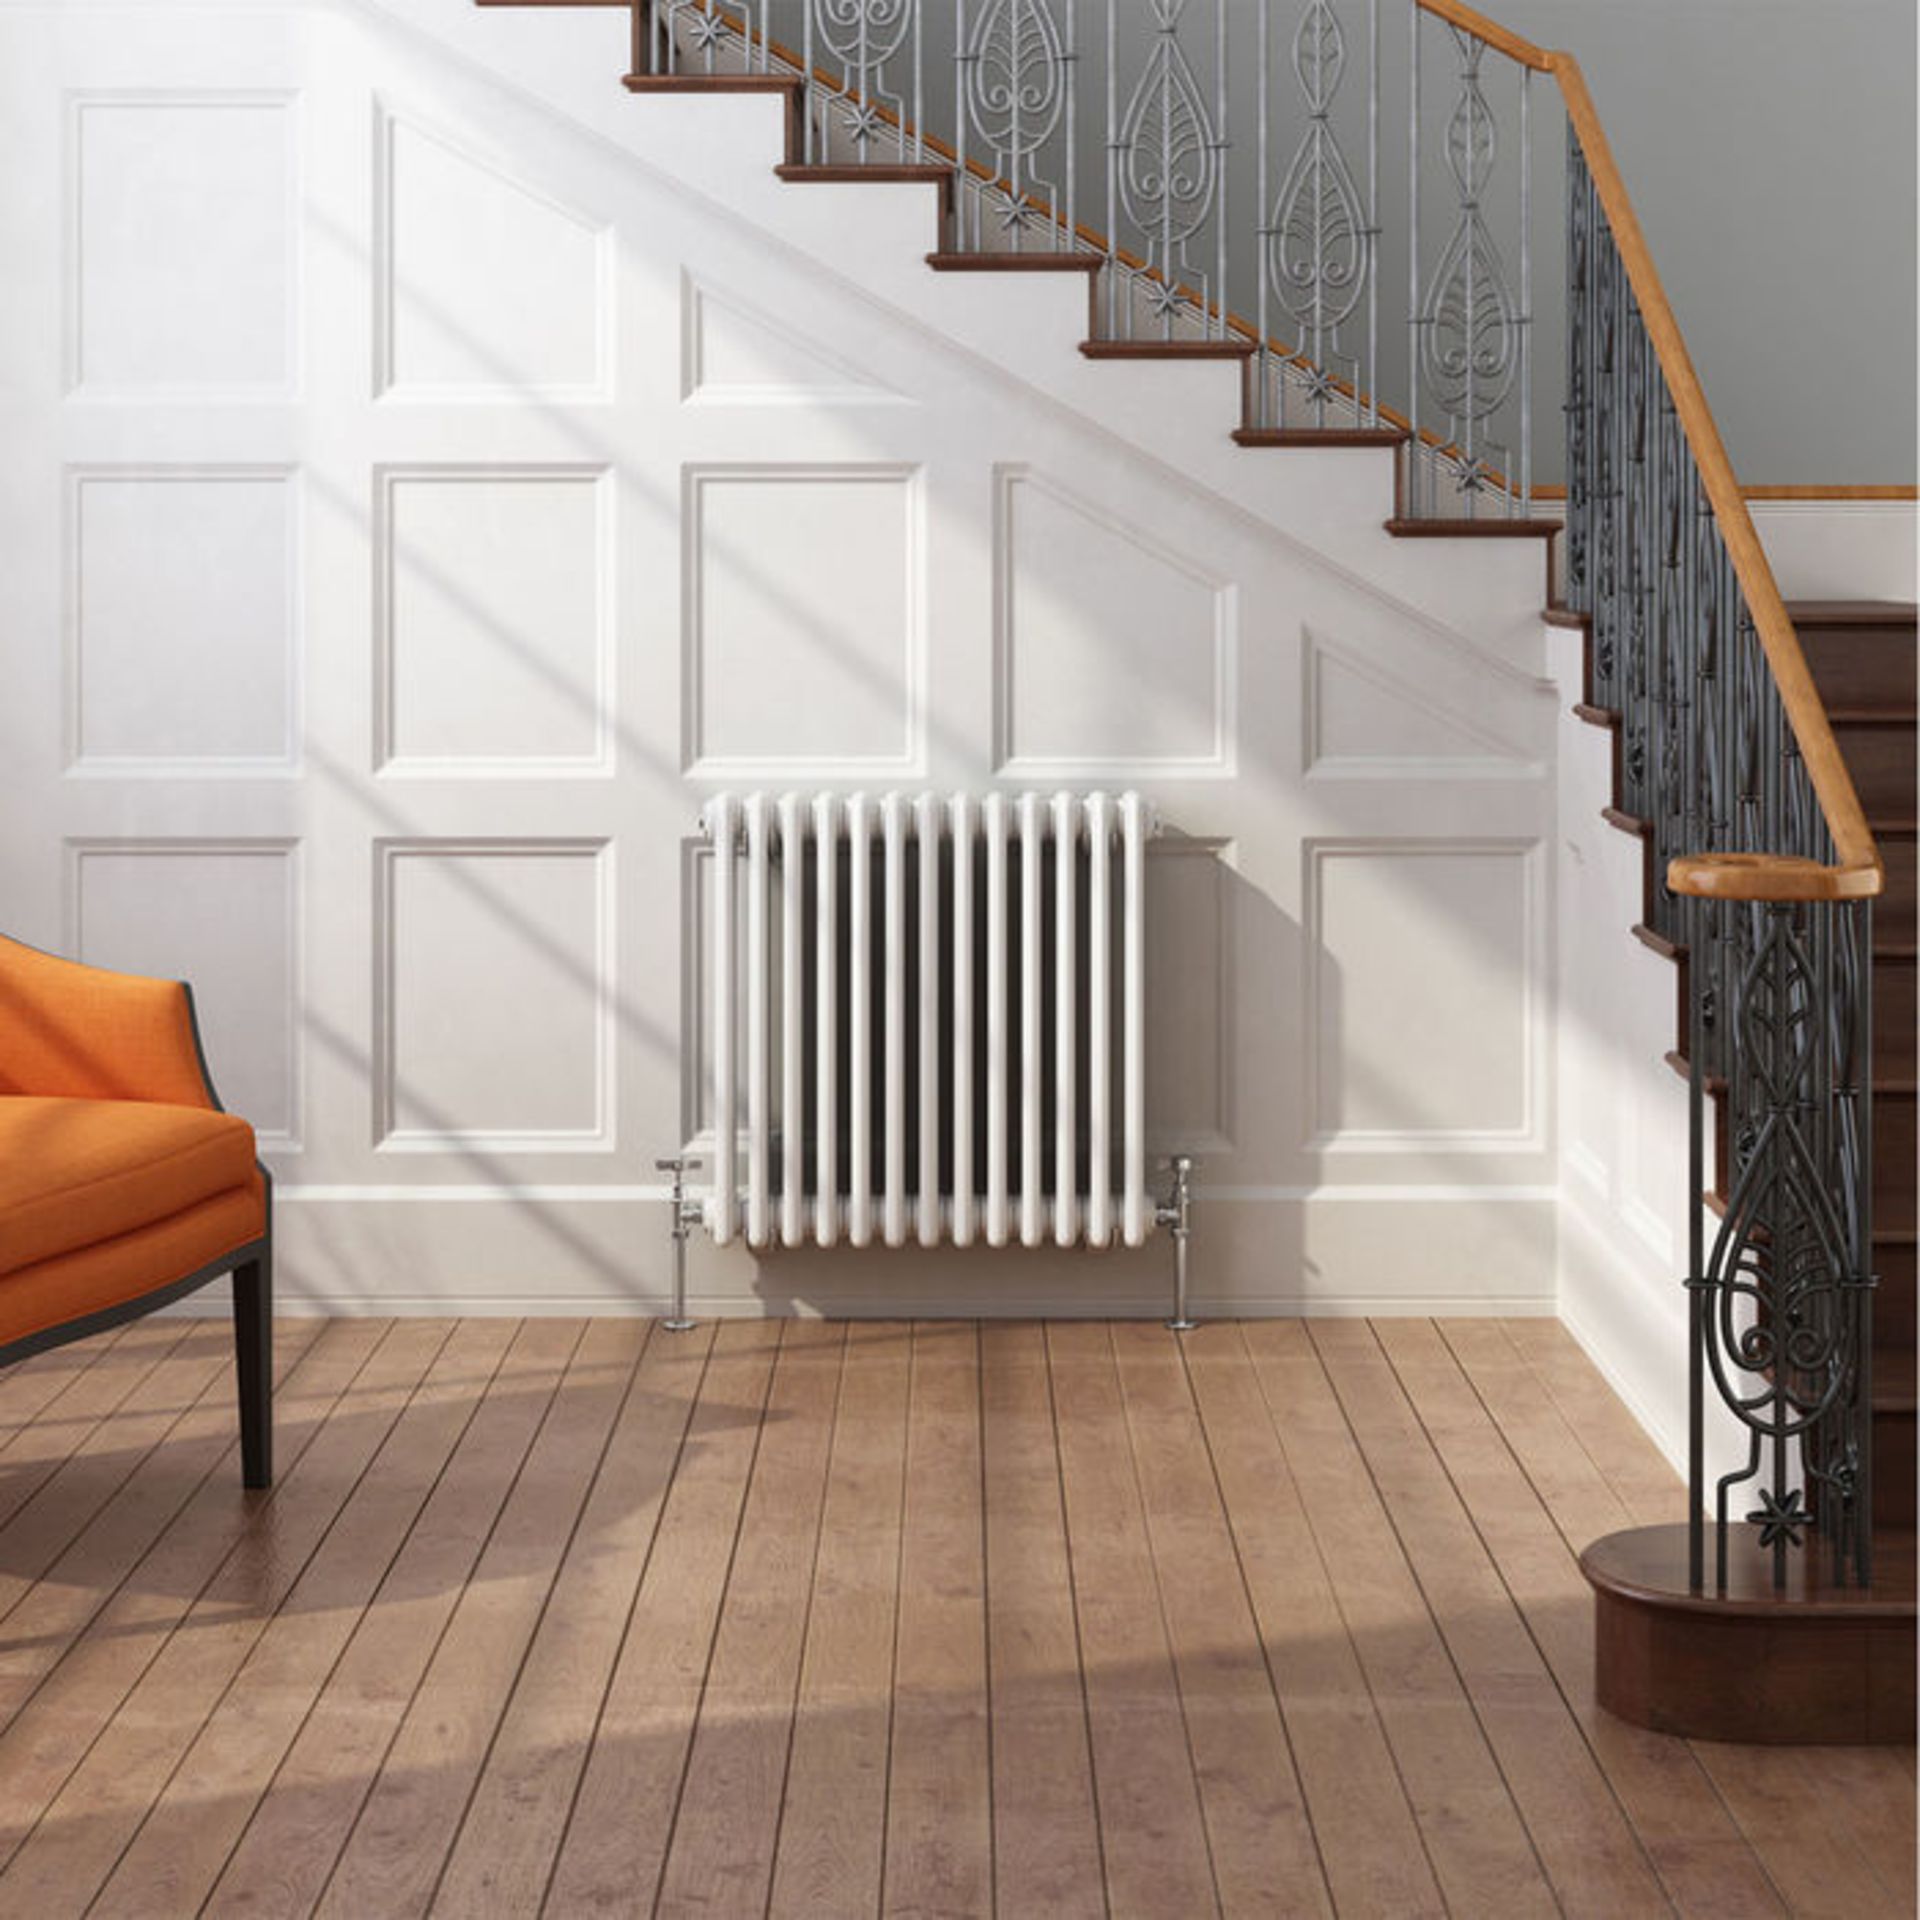 (CR11) 600x628mm White Double Panel Horizontal Colosseum Traditional Radiator. RRP £395.99.F... - Image 2 of 3